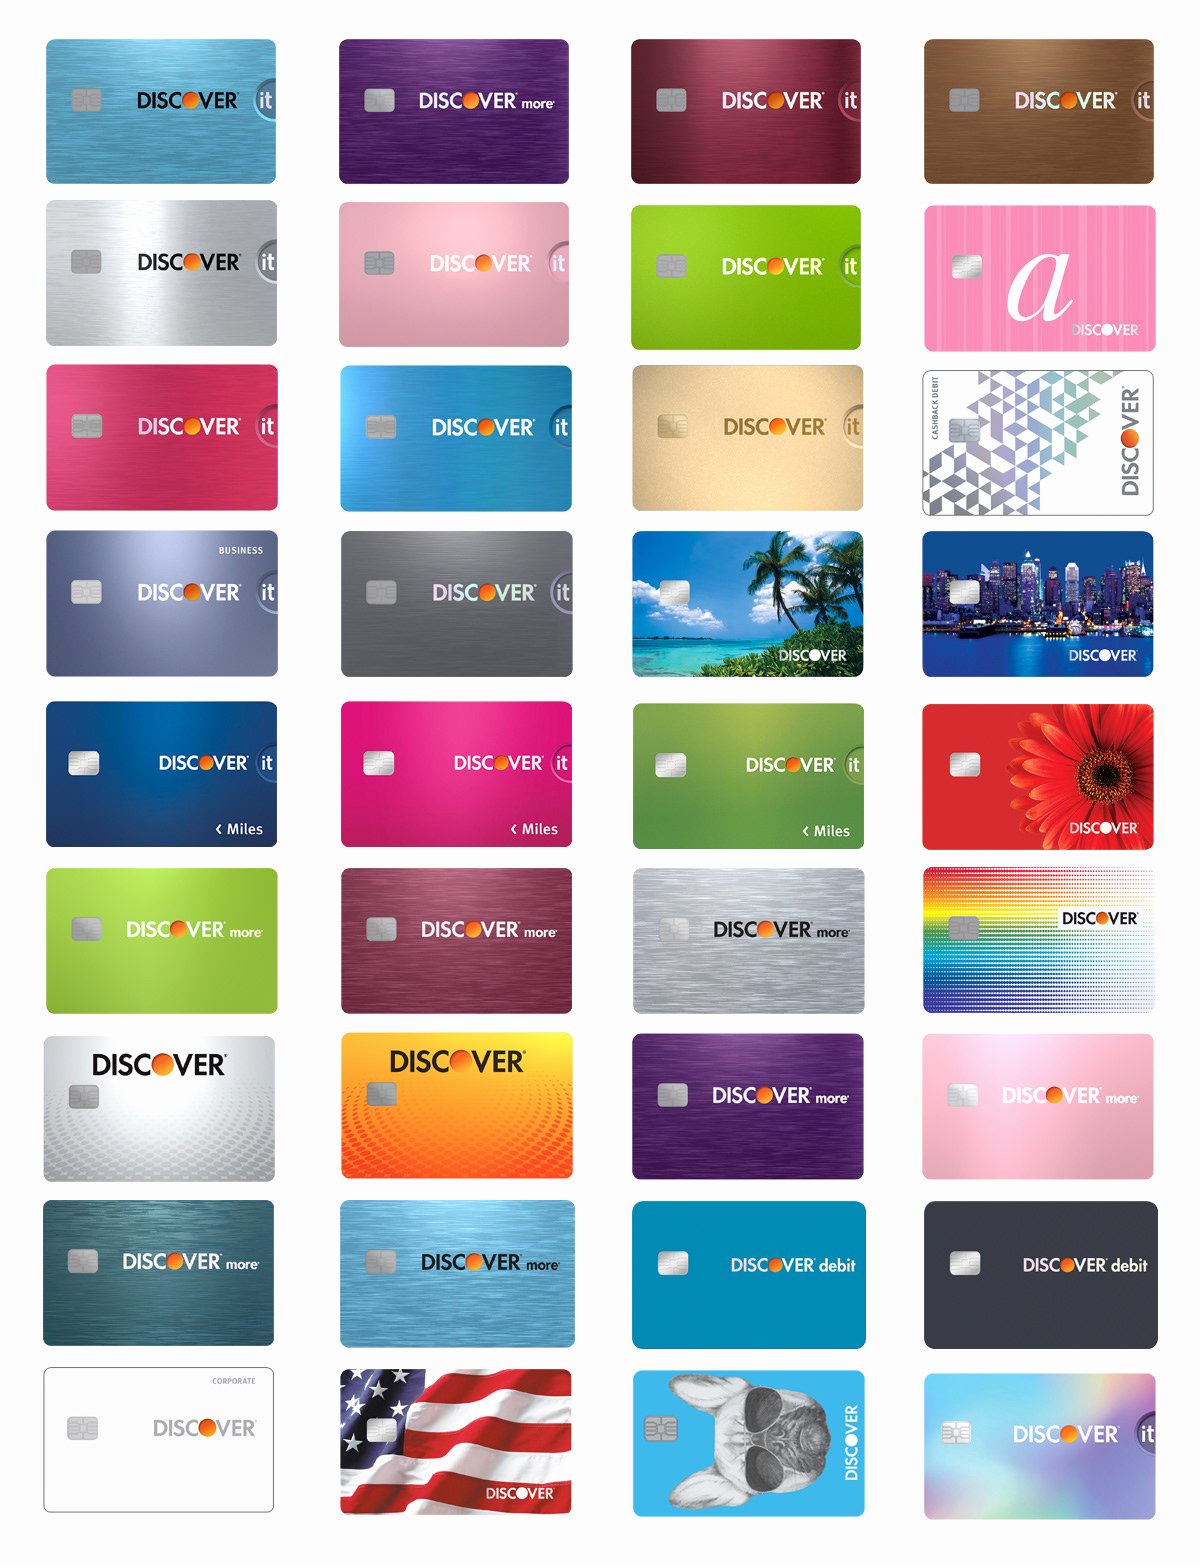 Discover It Card Designs Fresh Discover Card Art &amp; Design On Behance